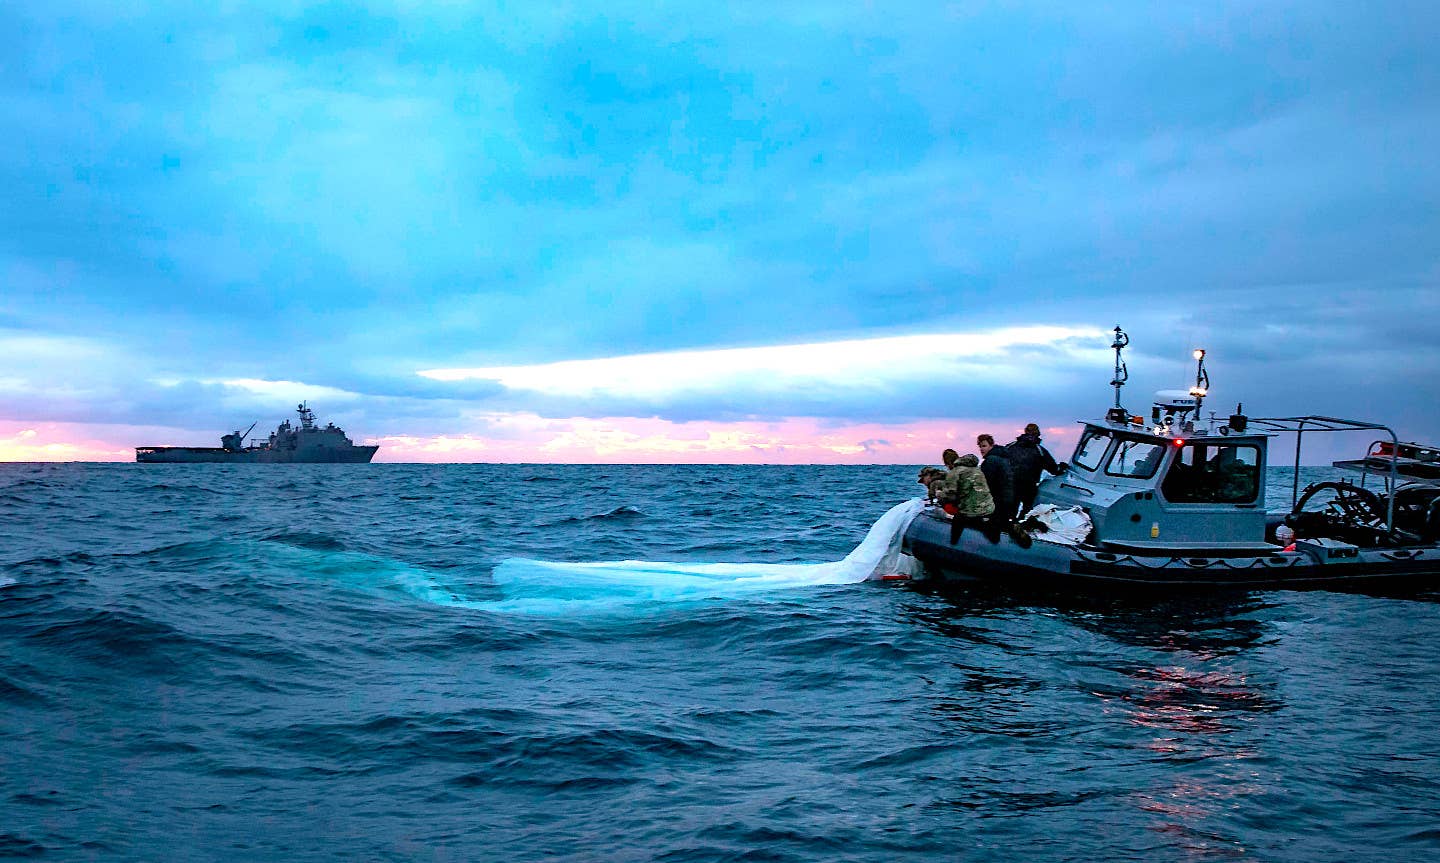 The <em>Harpers Ferry</em> class amphibious warfare ship USS <em>Carter Hall</em> sails in the background as Navy sailors recover a portion of the Chinese spy balloon's envelope. <em>USN</em>